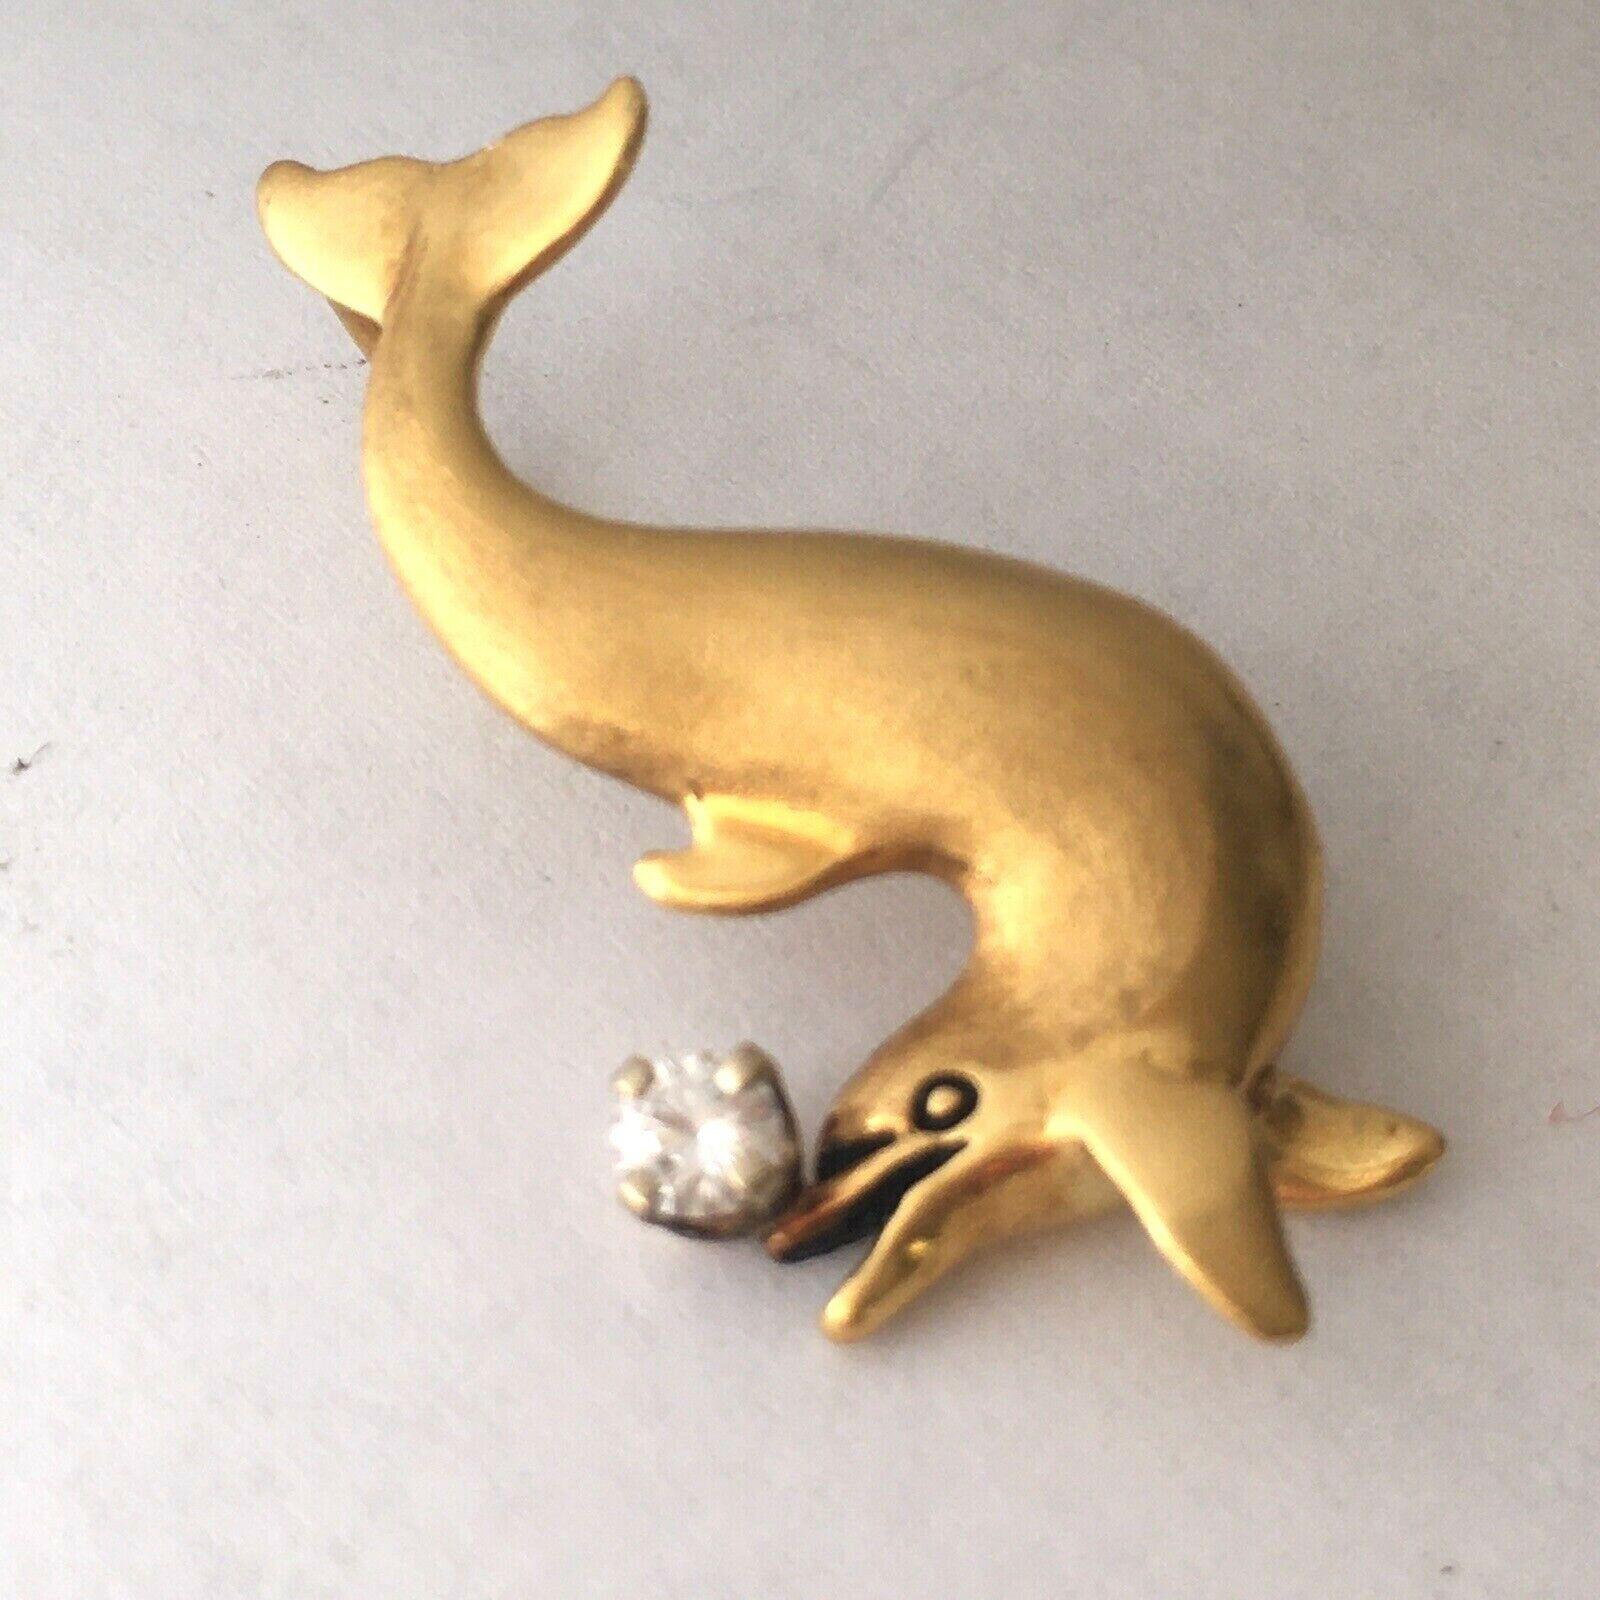 g & g Appleby 18K Yellow Gold Playful Dolphin 3D Charm Pendant Signed Copyright In Good Condition For Sale In Santa Monica, CA